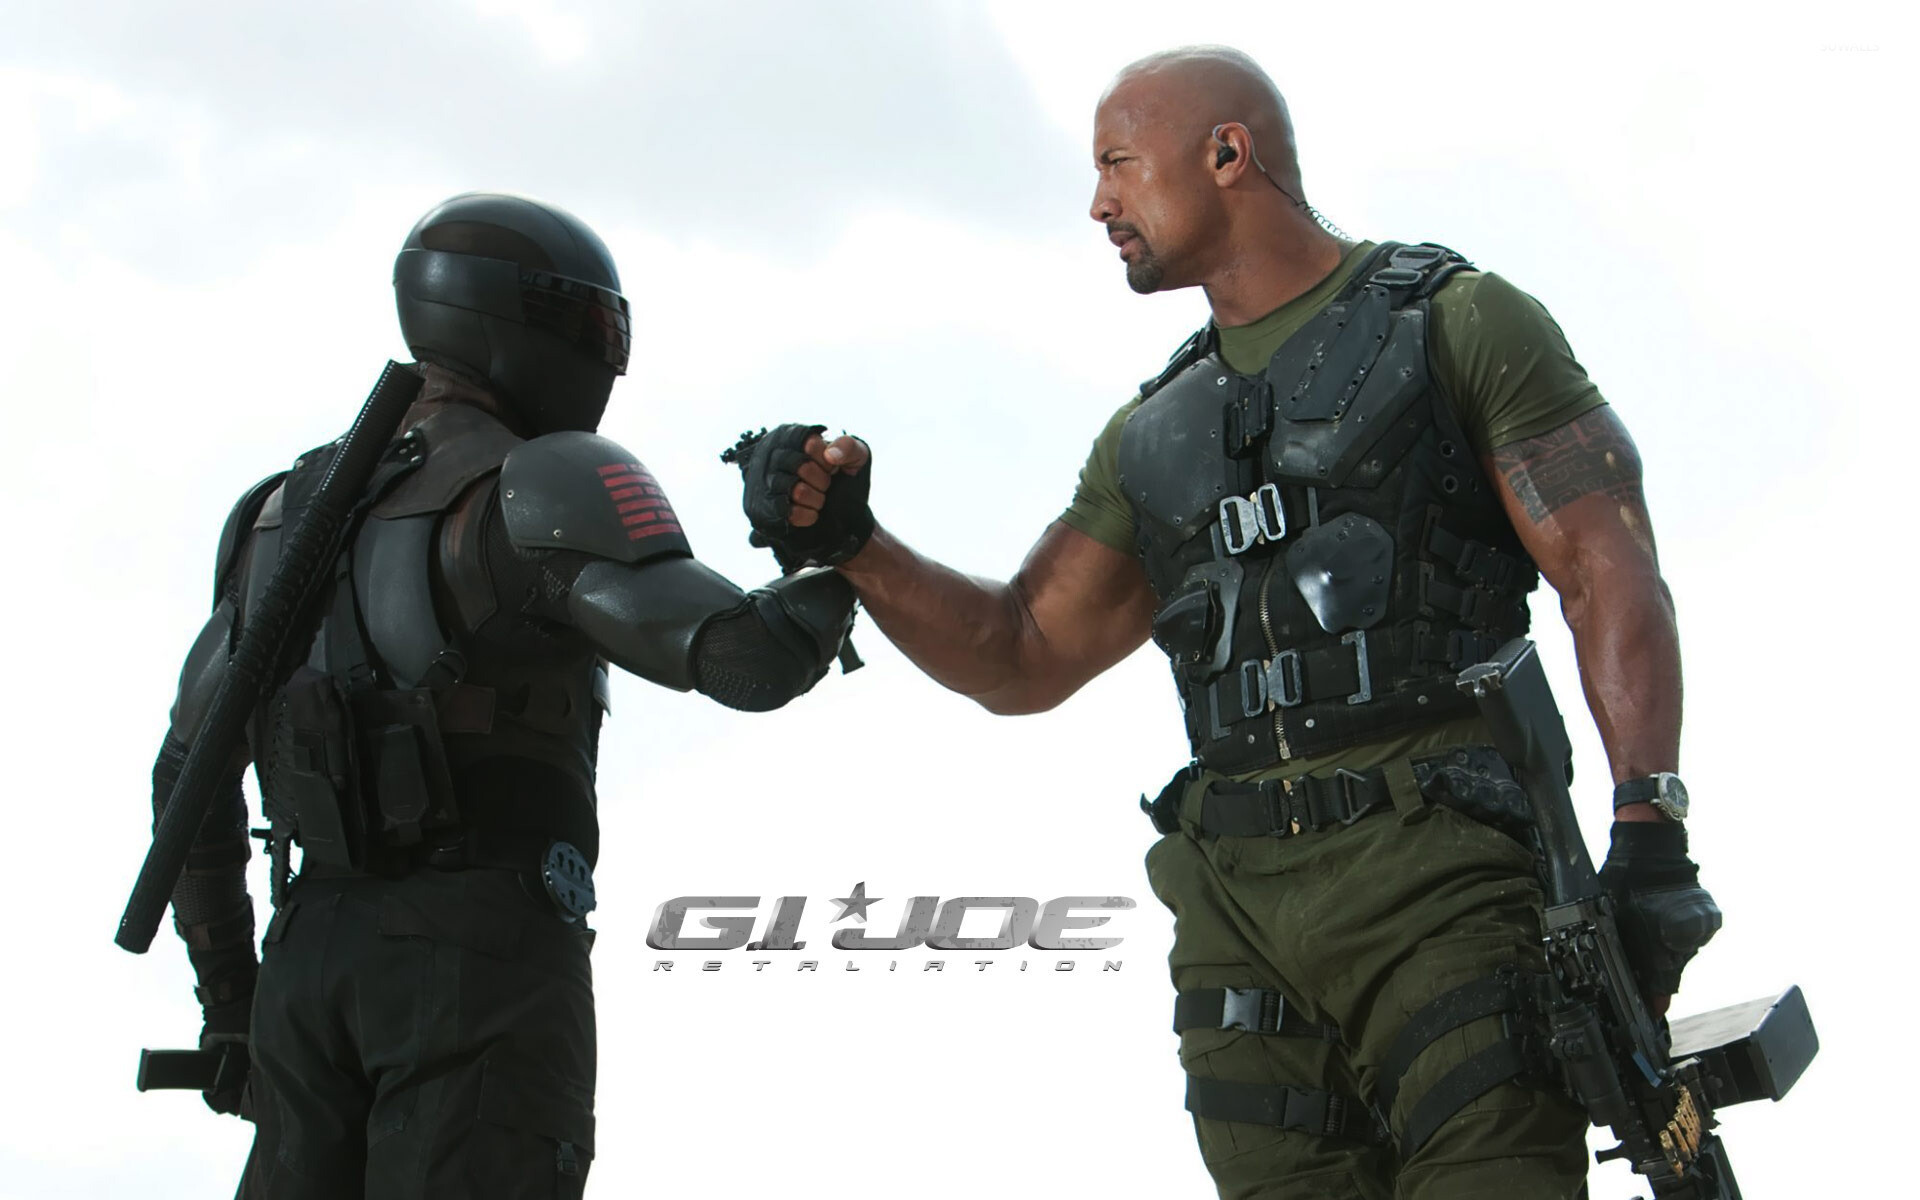 G.I. Joe (Movie): Roadblock And Snake Eyes, Retaliation, The Second Part Of The Film Series, The Rock. 1920x1200 HD Wallpaper.